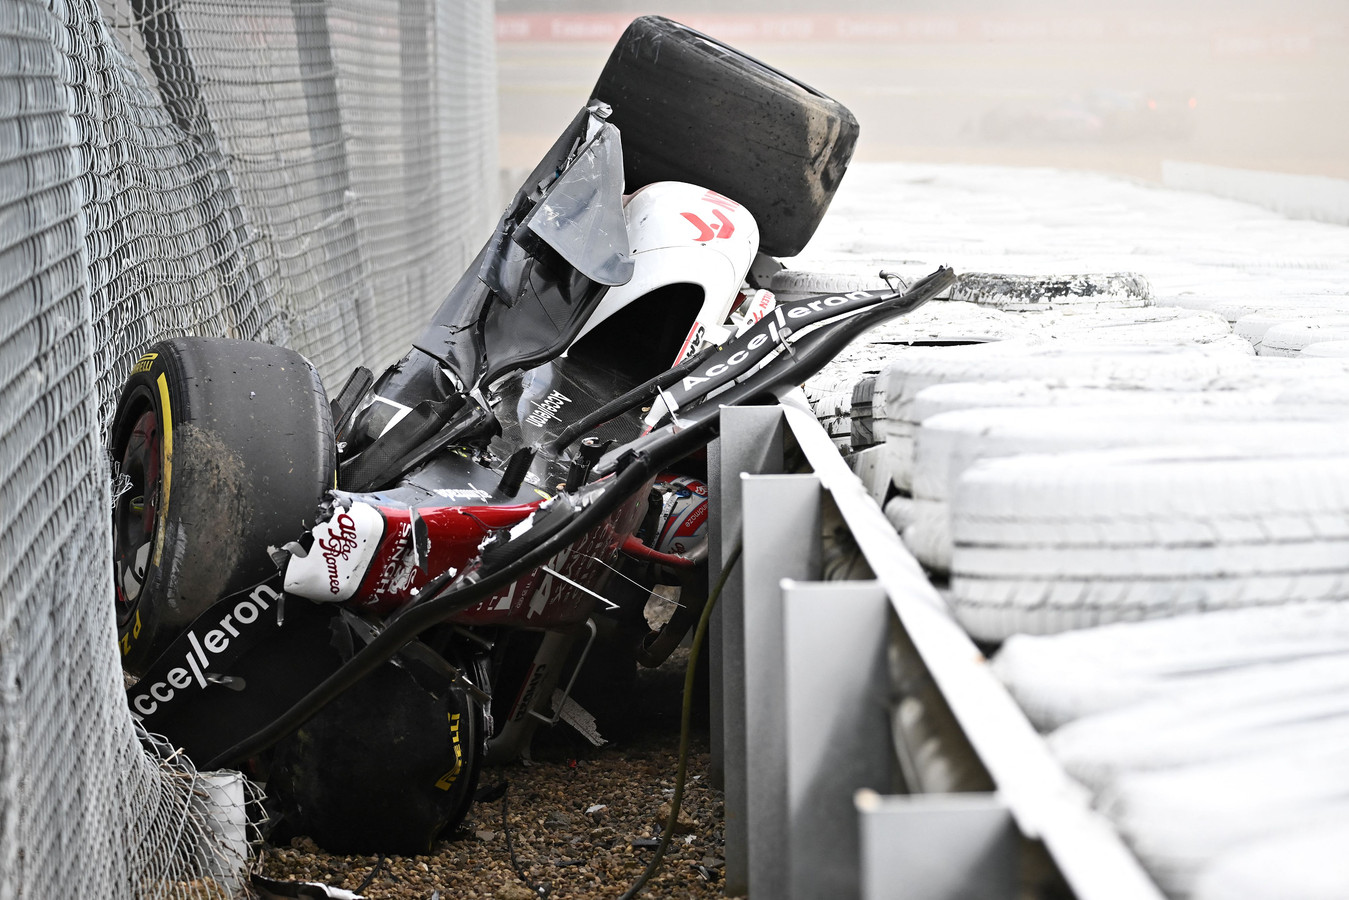 TOPSHOT - Alfa Romeo Chinese driver Zhou Guanyu is seen in the crash barriers during an incident at the star during the Formula One British Grand Prix at the Silverstone motor racing circuit in Silverstone, central England on July 3, 2022. (Photo by Ben Stansall / AFP)